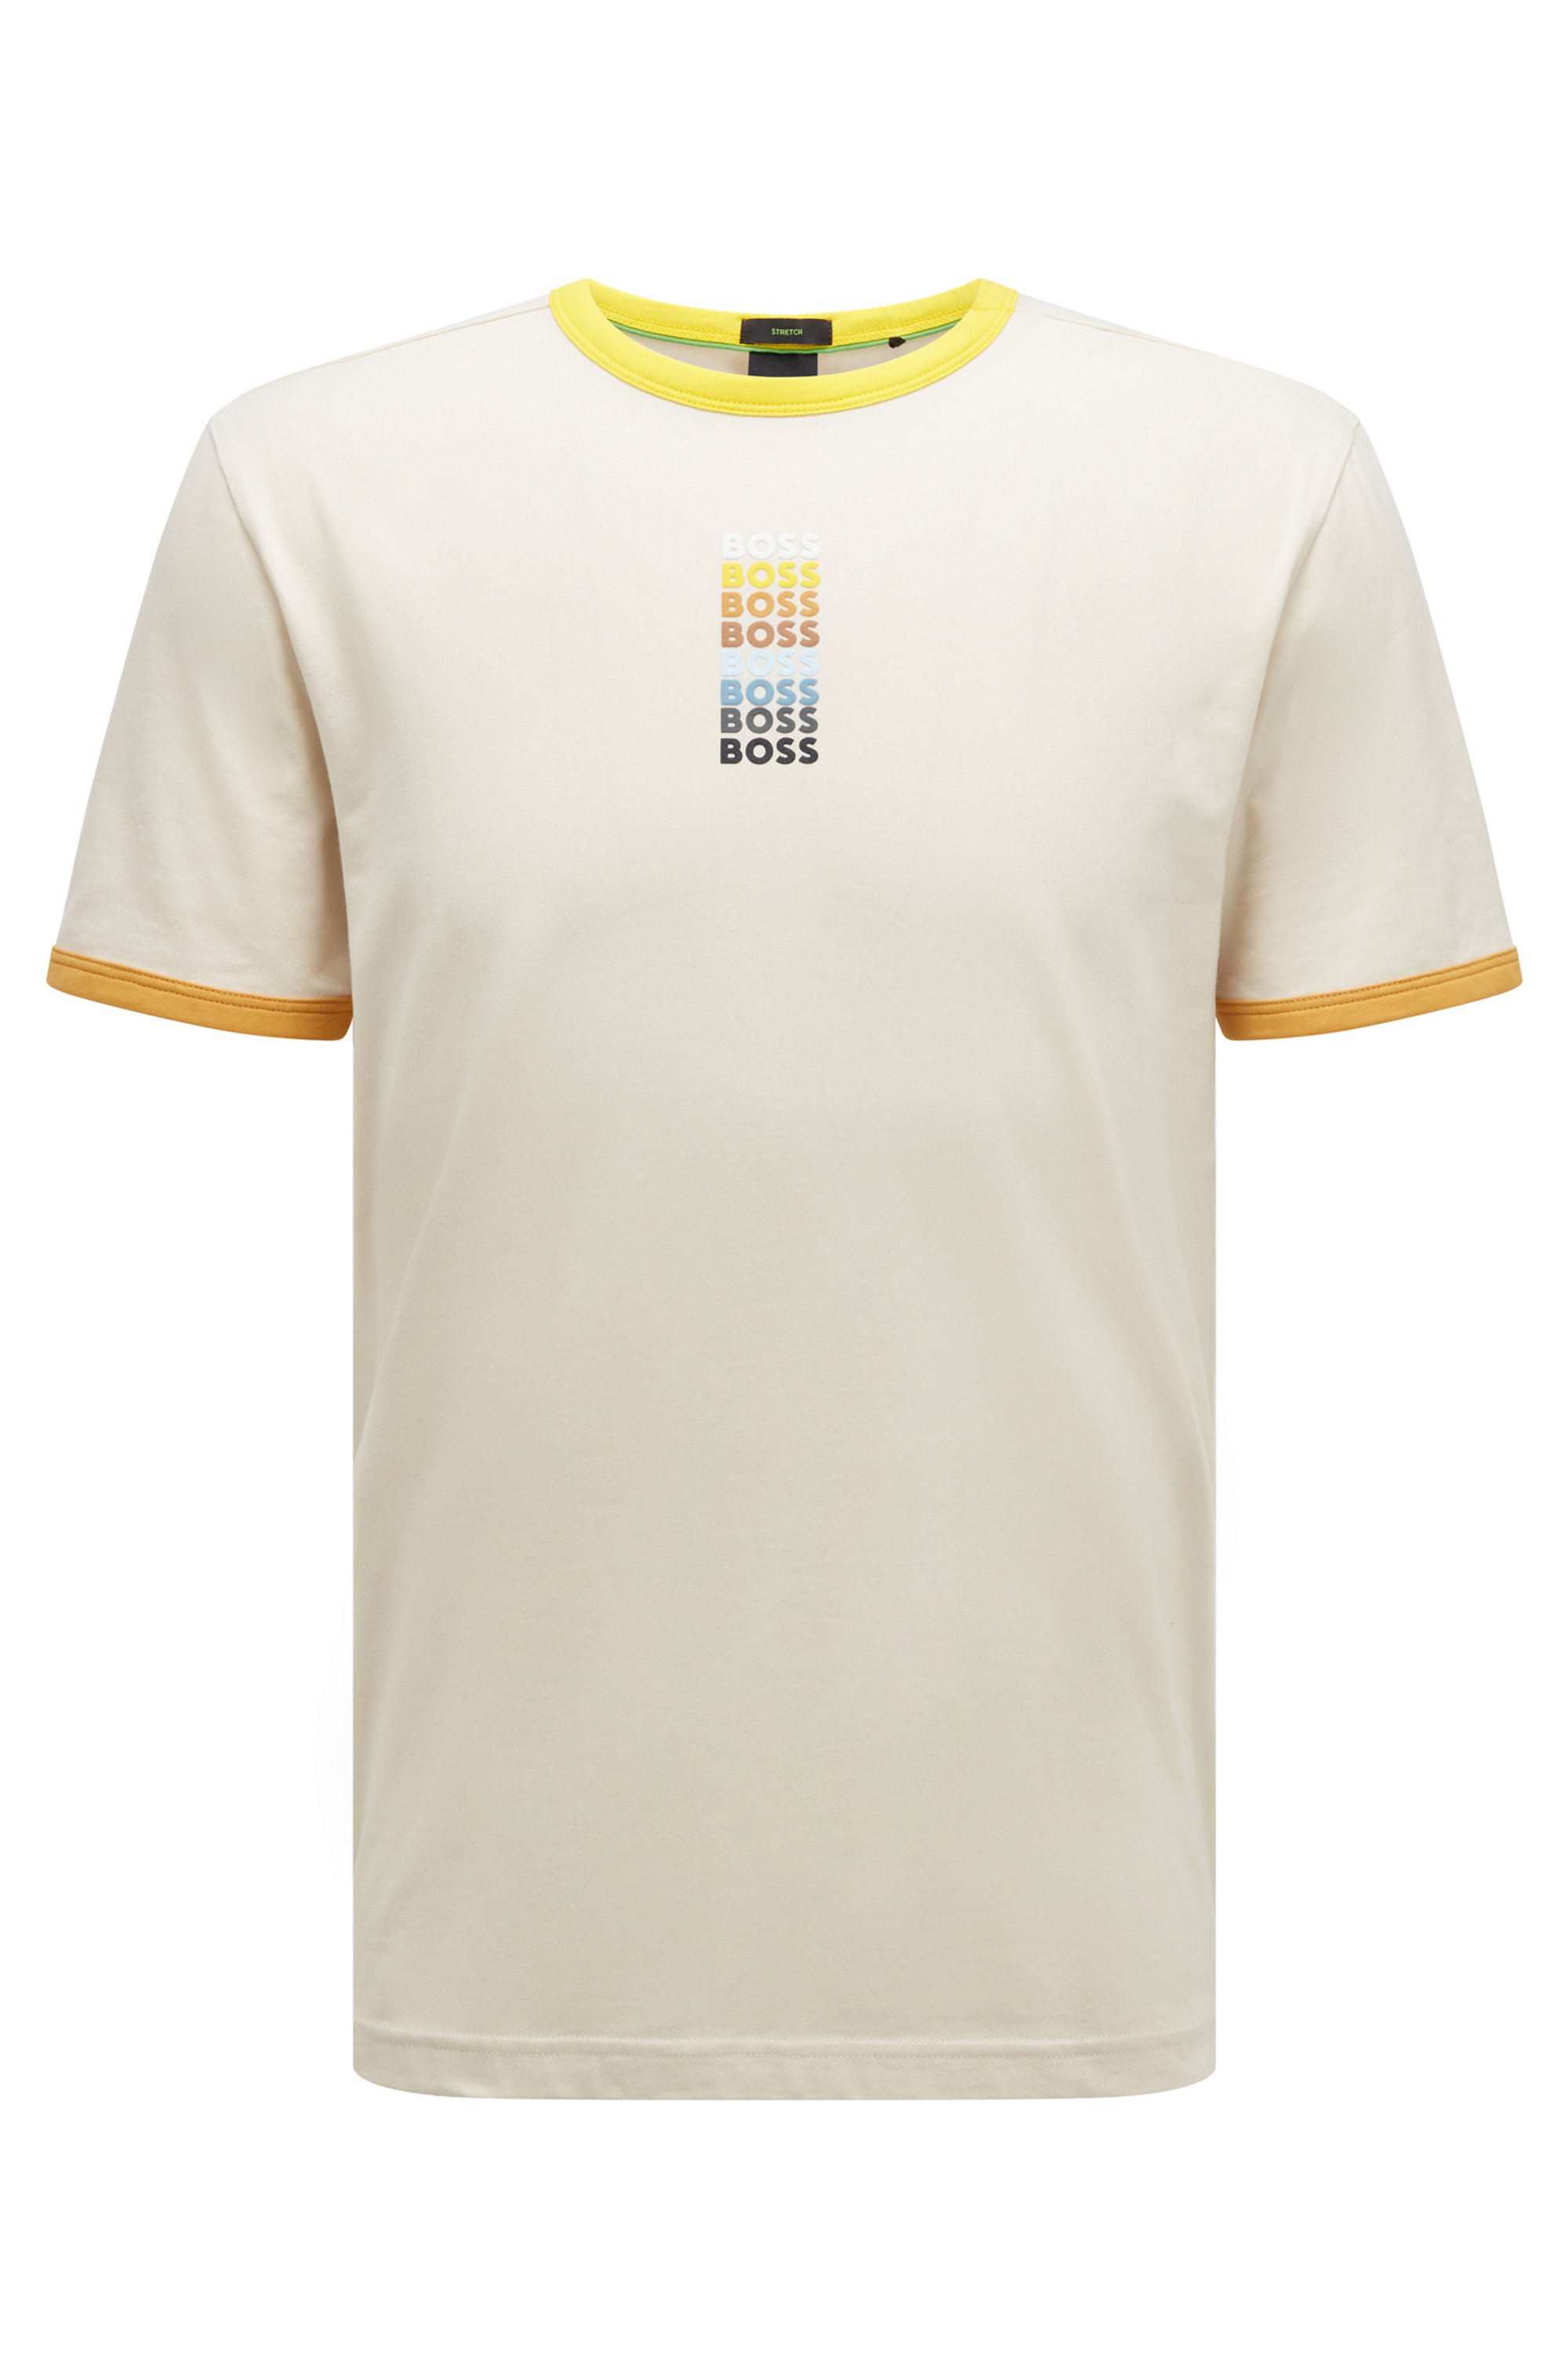 T-shirt in stretch cotton with repeat logos, White